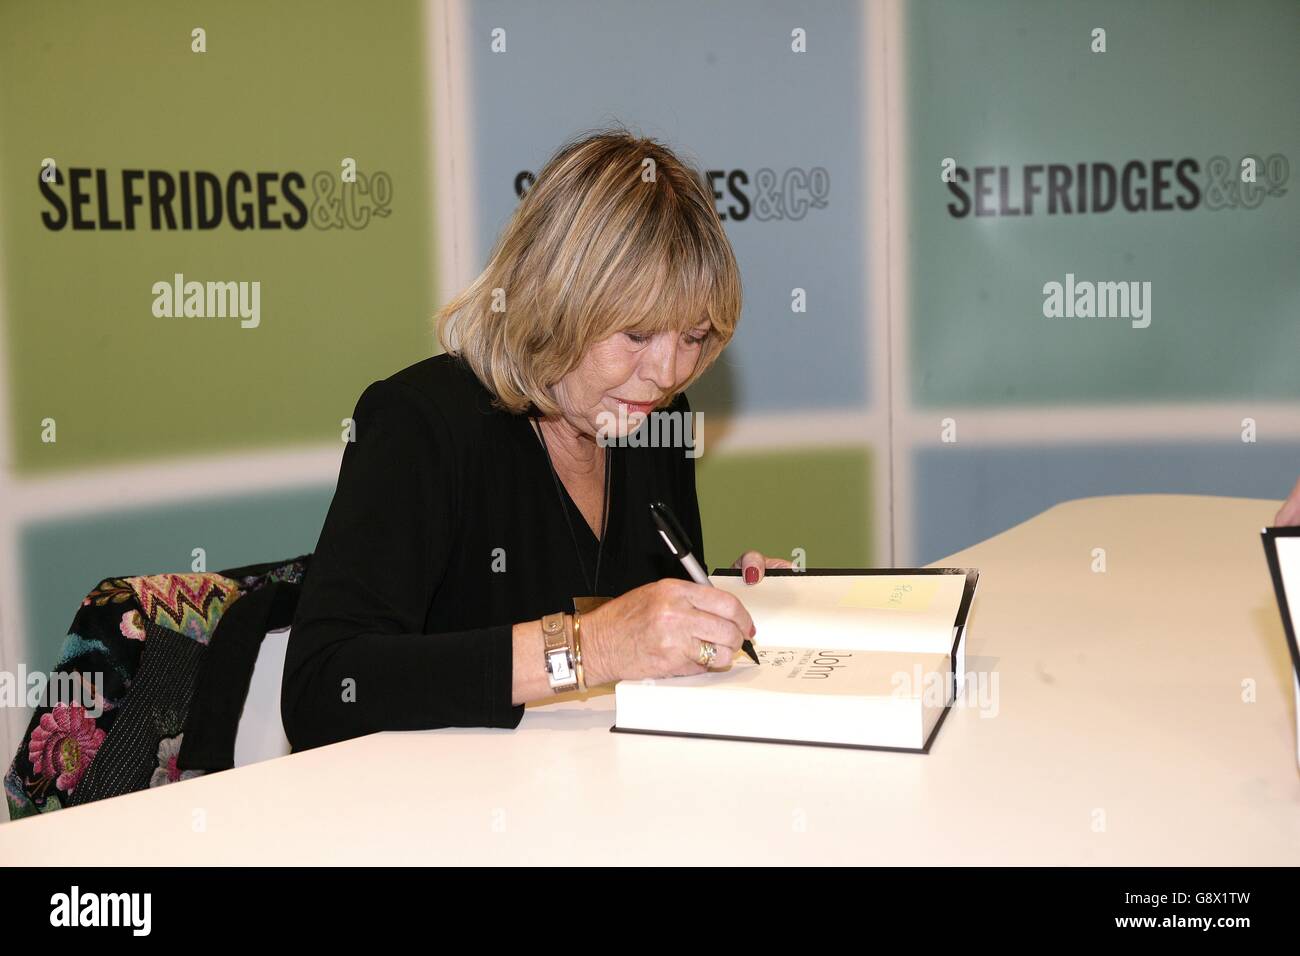 Cynthia Lennon attends a book signing to celebrate the launch of her book, 'John', about her life with John Lennon. Stock Photo